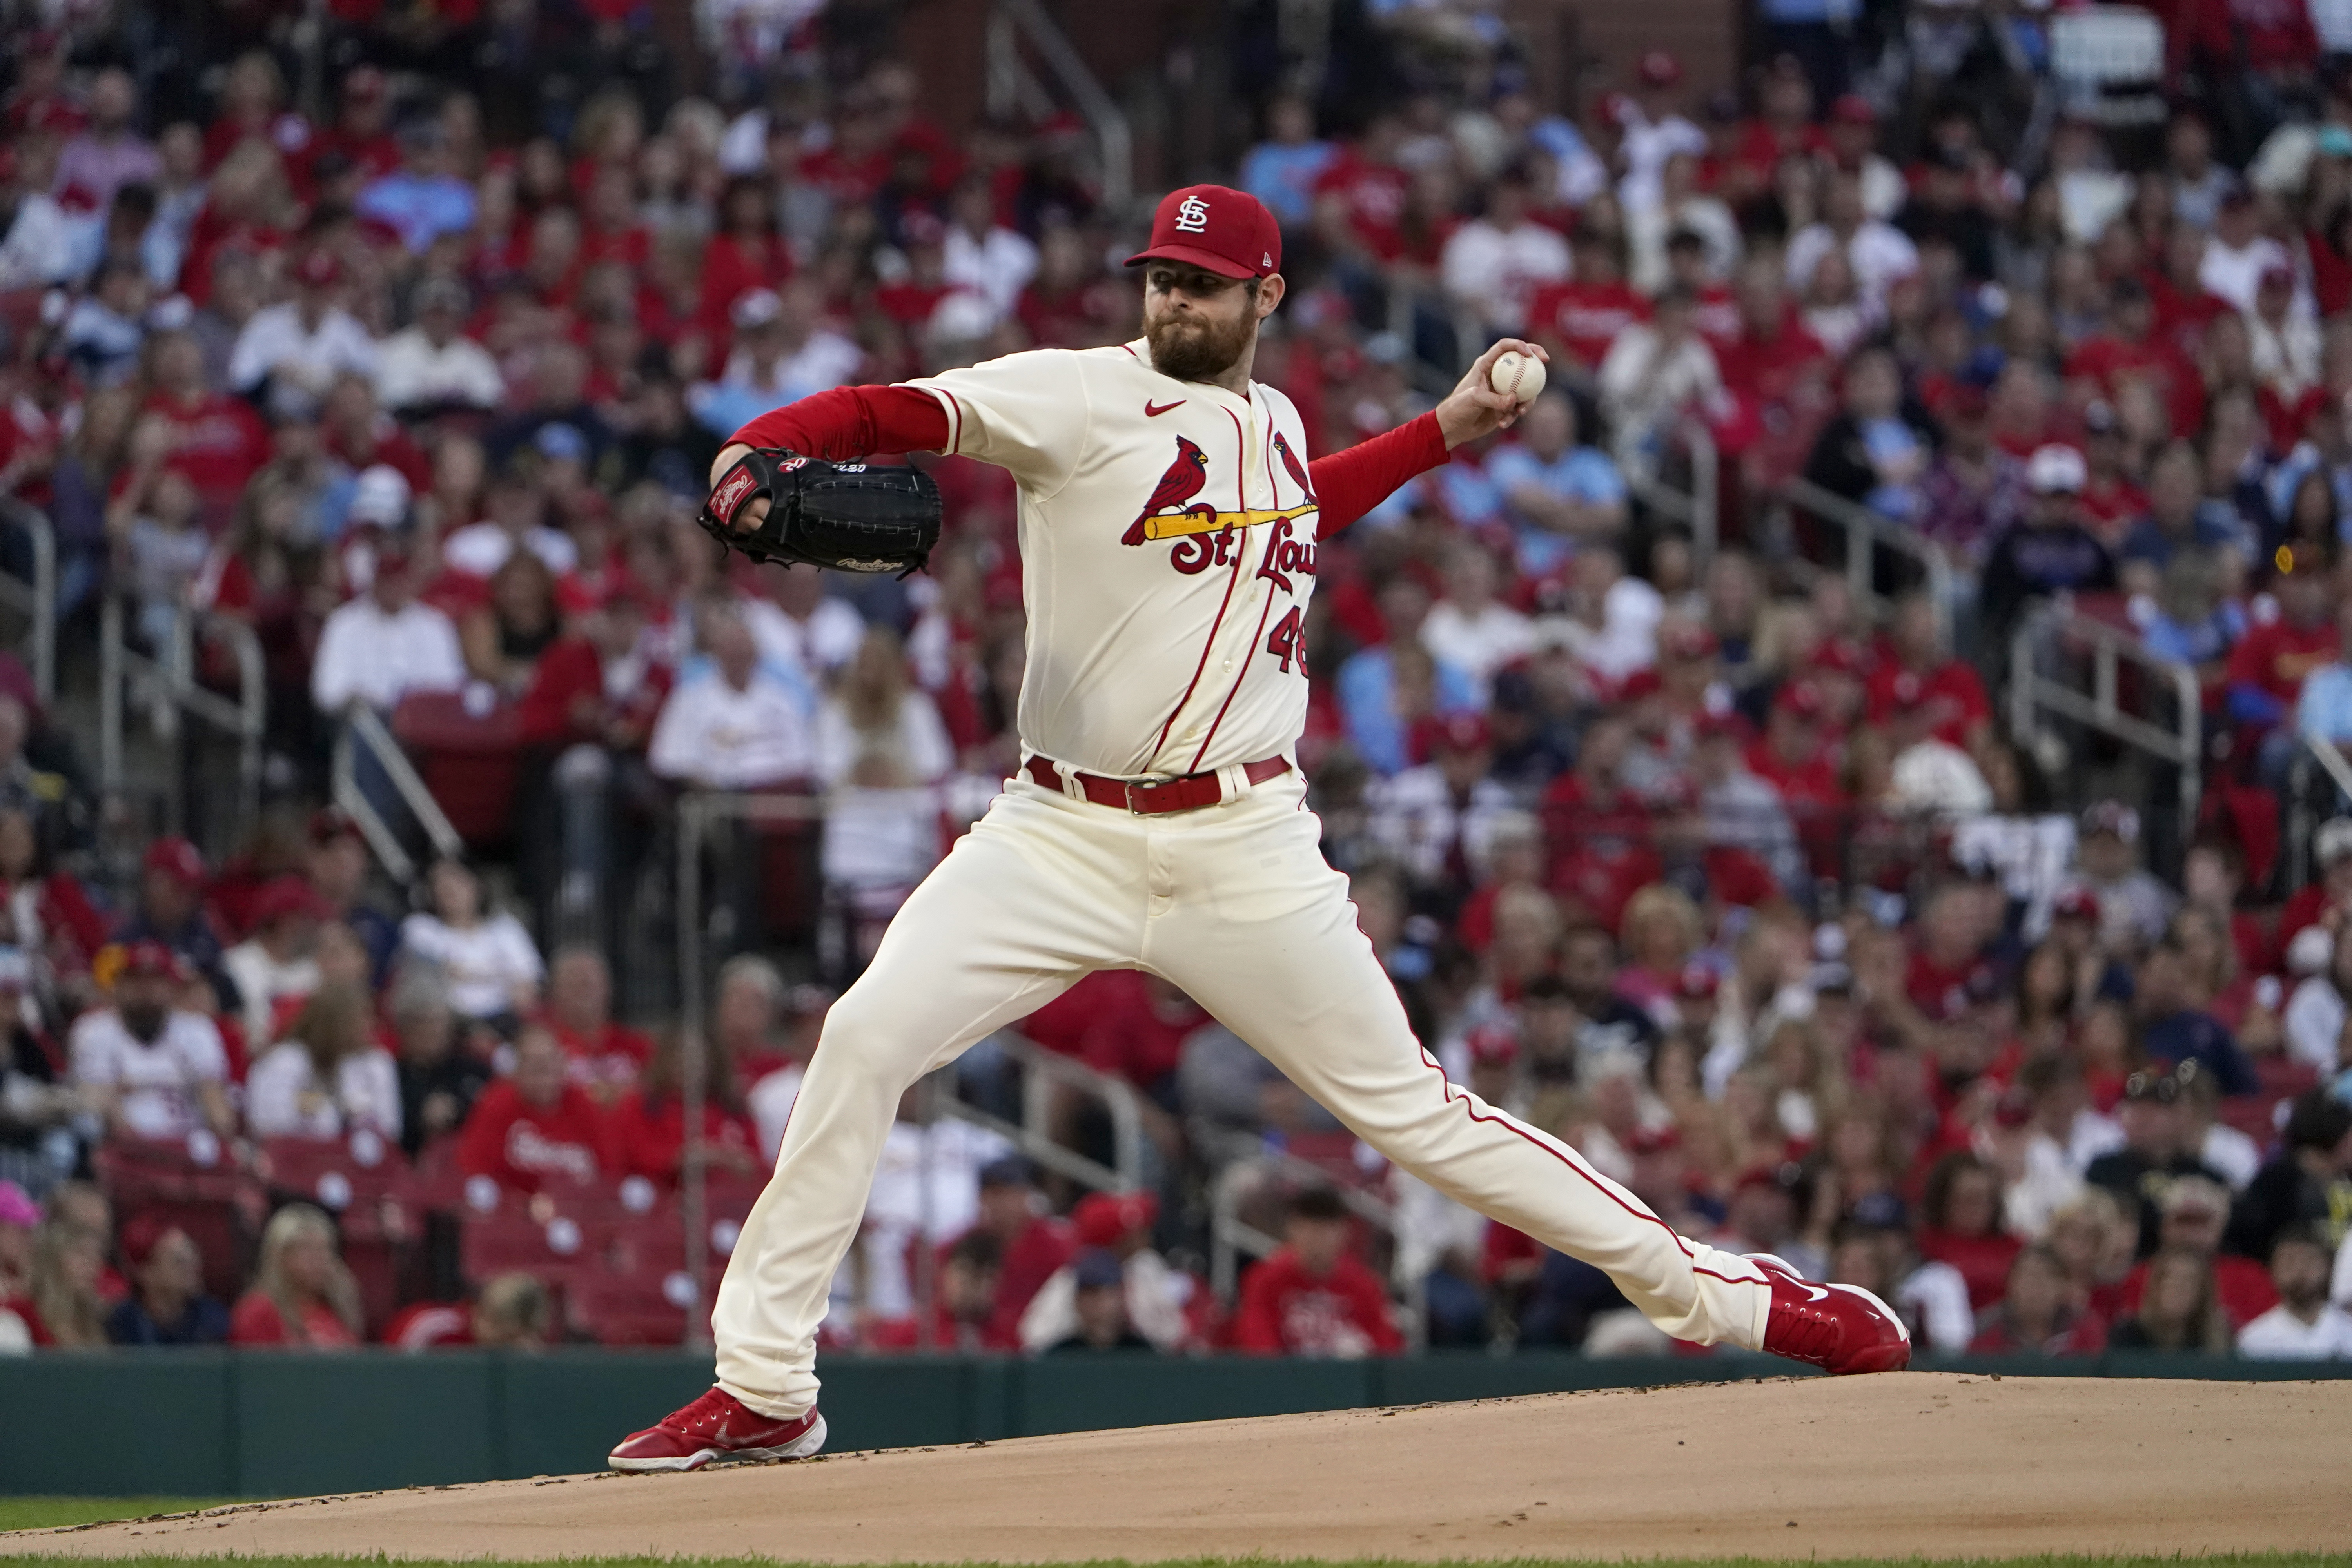 Cardinals host the Phillies in Game 1 of NL Wild Card Series